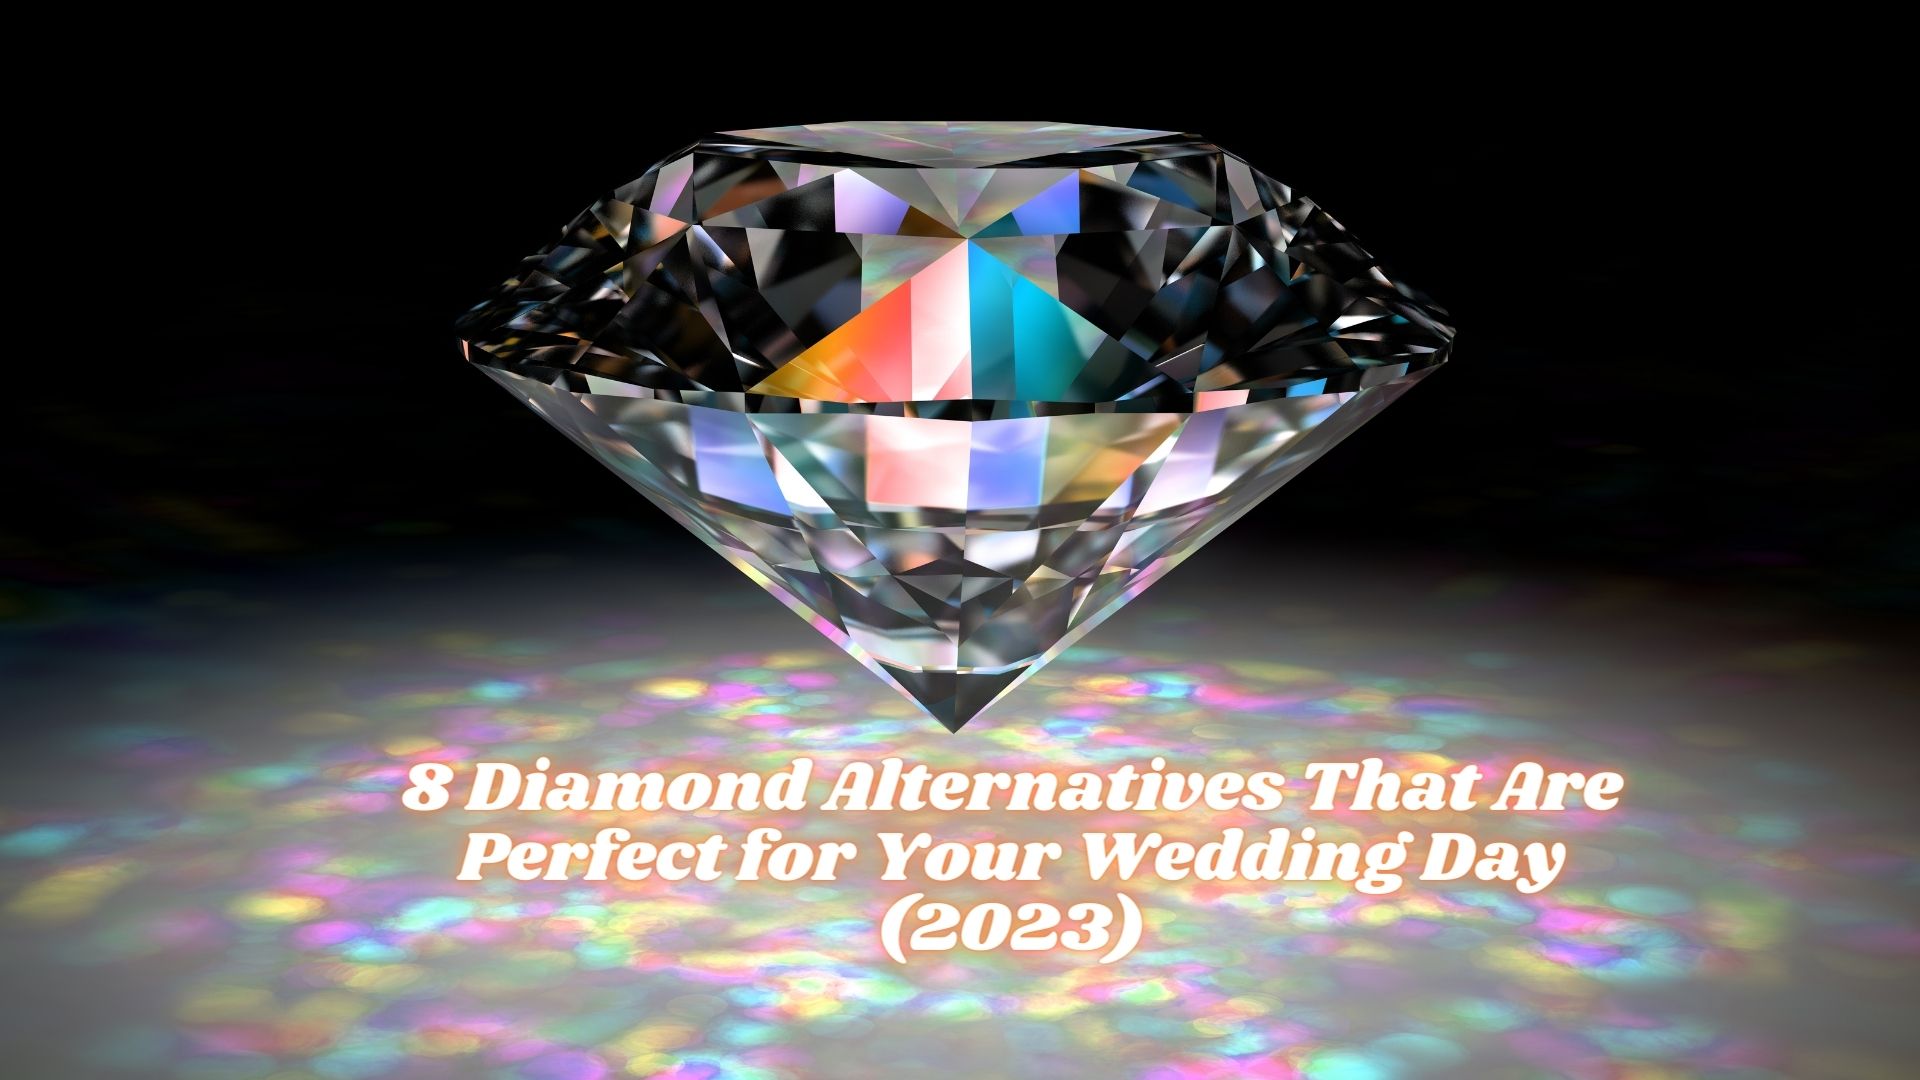 8 Diamond Alternatives That Are Perfect for Your Wedding Day (2023)